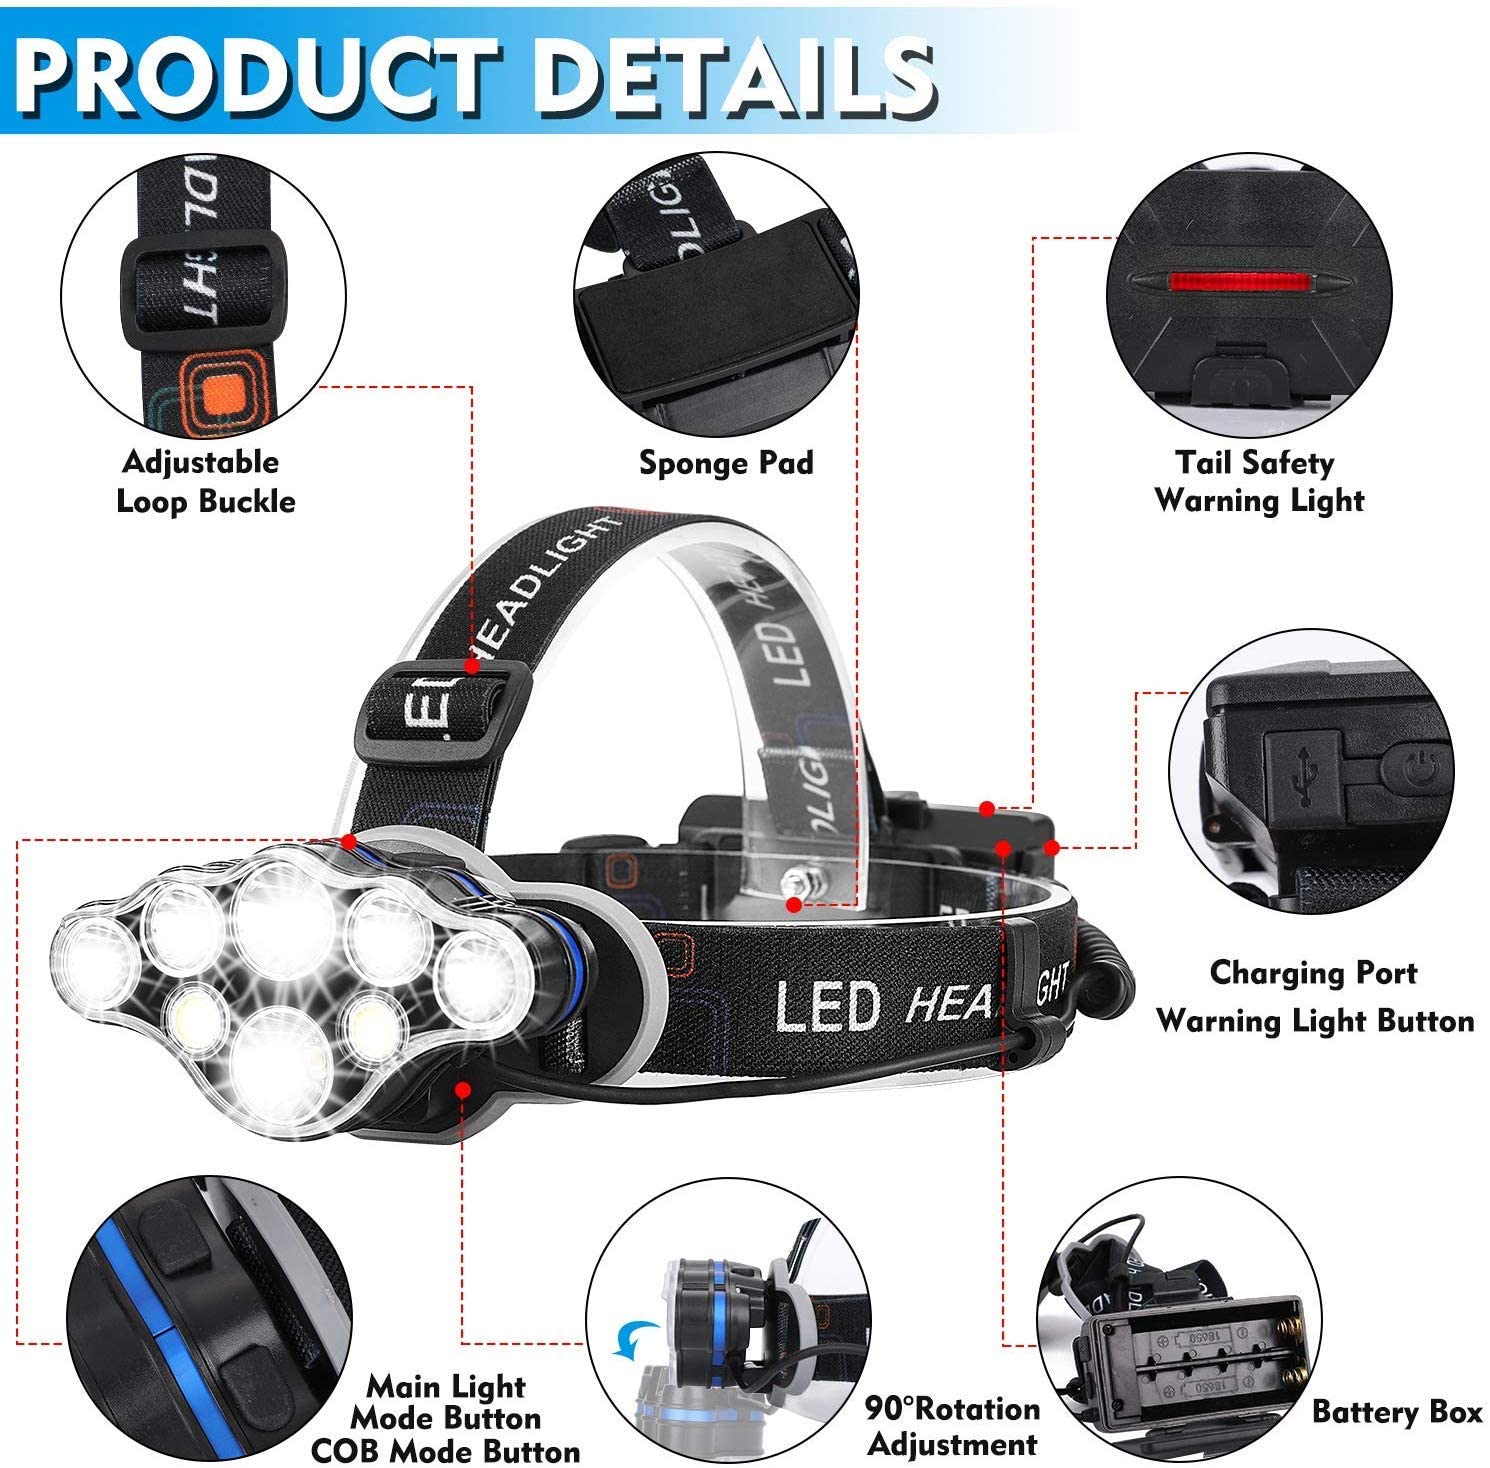 Lampe Frontale,torche Frontale 18000 Lumens 8 Led 8 Modes D